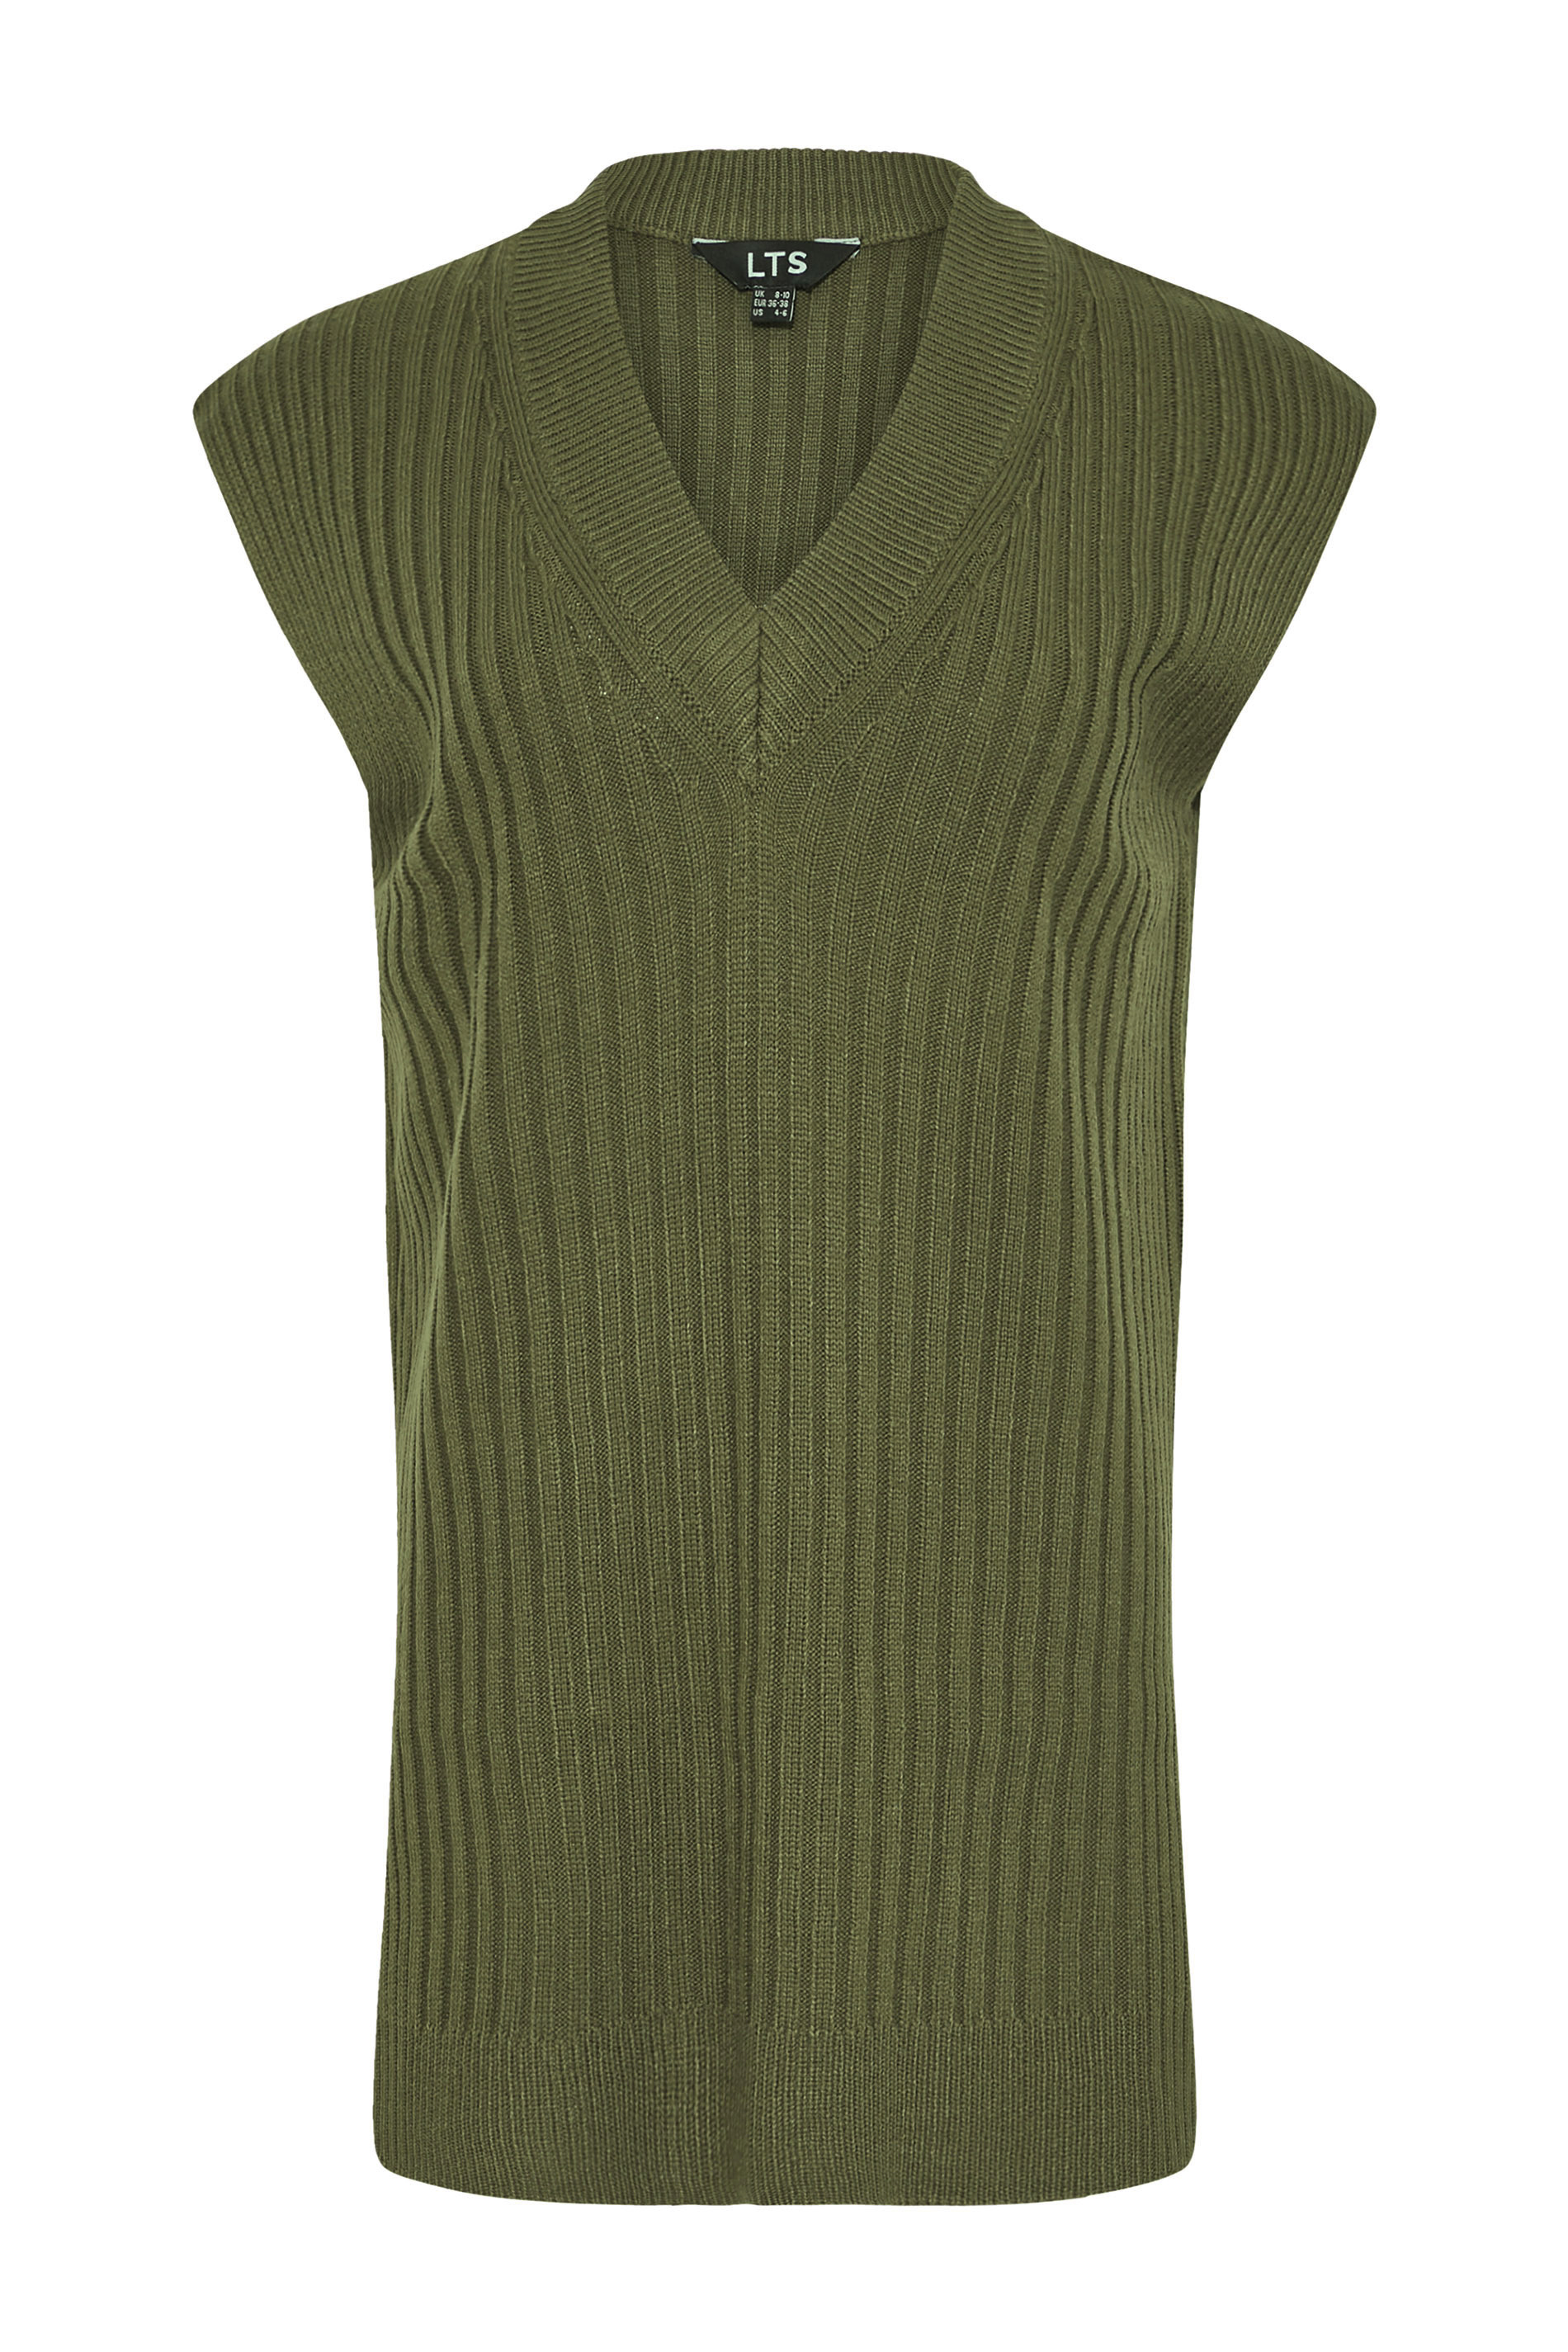 LTS Tall Women's Khaki Green Knitted Ribbed Vest Top   Long Tall Sally